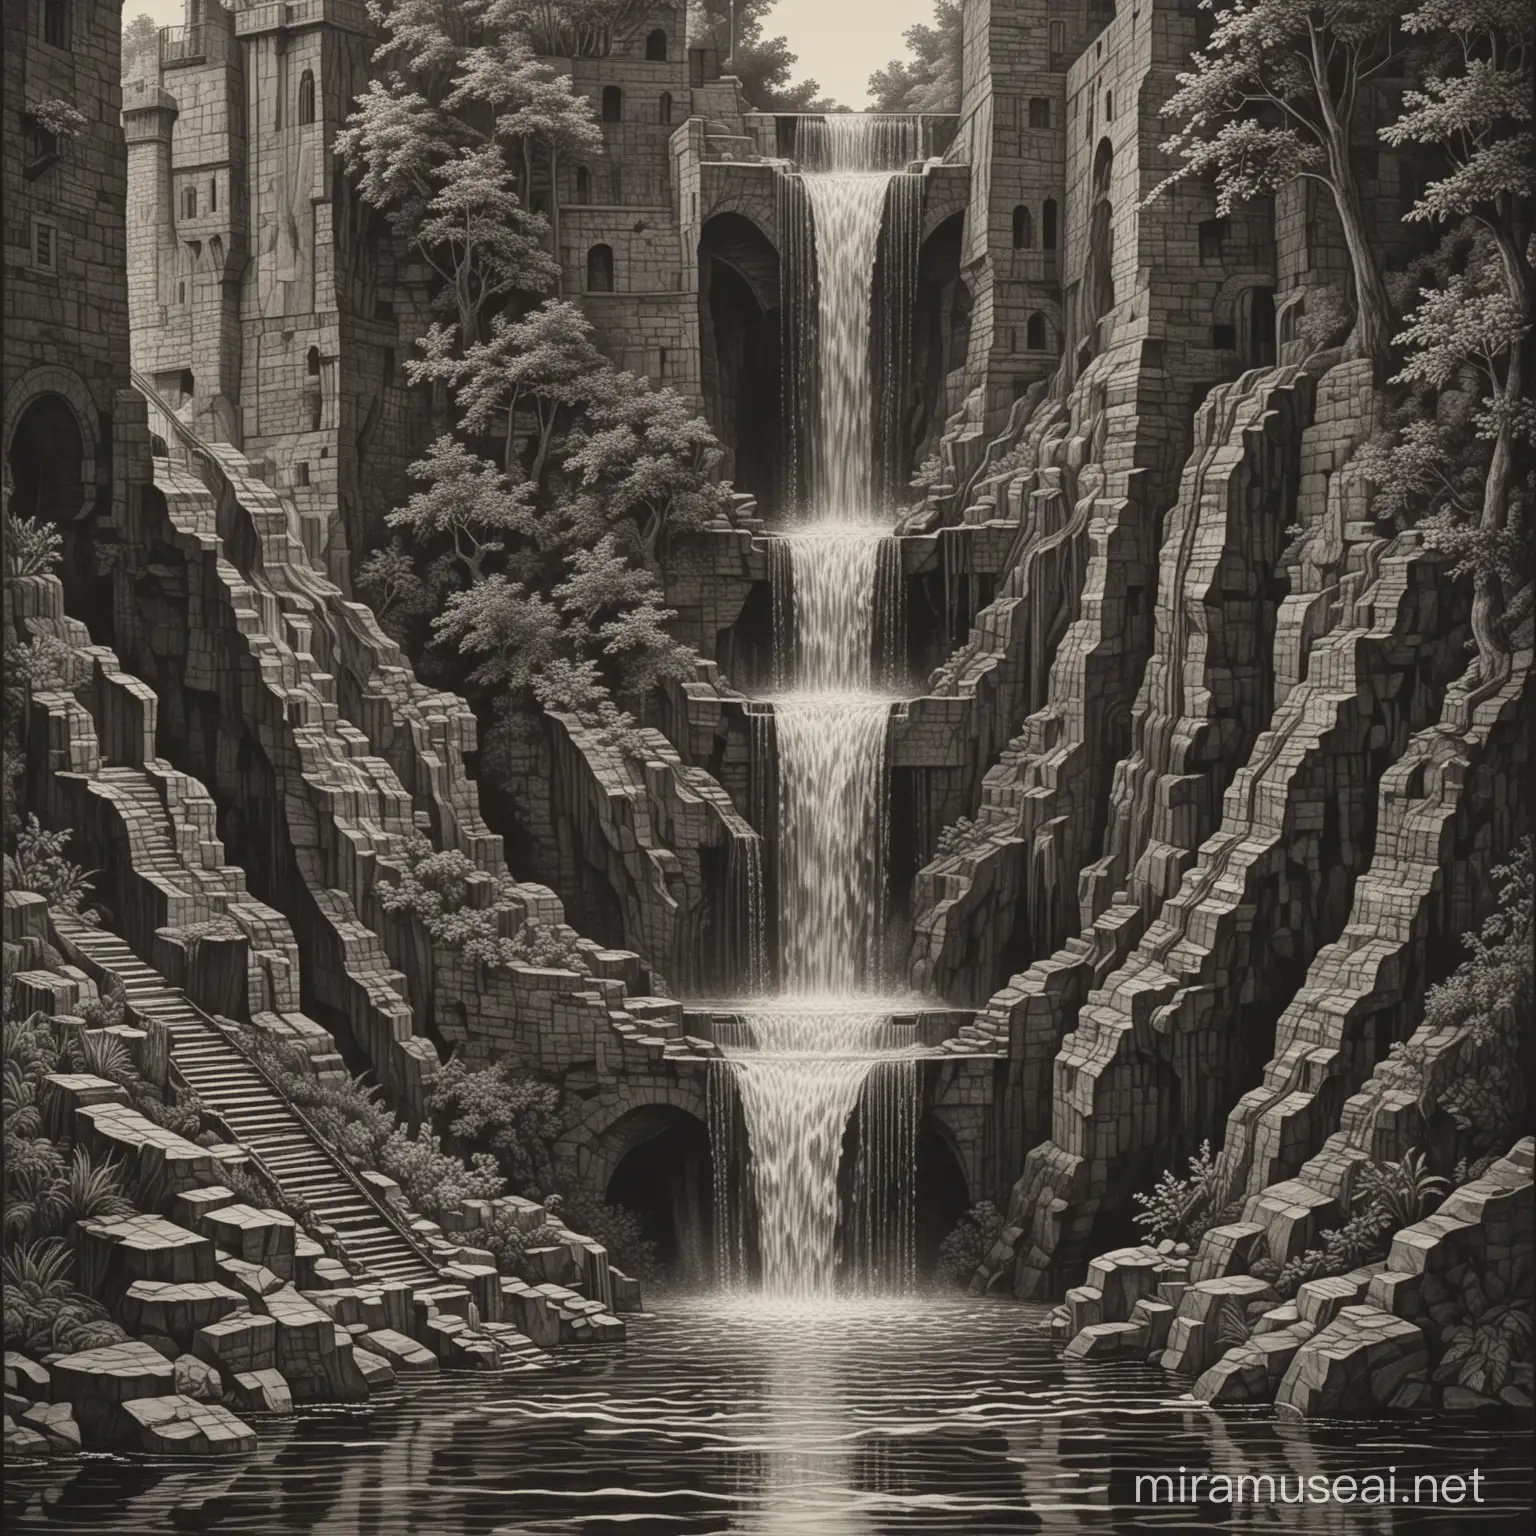 Highly detailed mezzotint painting based on ((('Waterfall' (1962) by M.C. Escher))), a tower with an aqueduct and waterfall, water flows in a circuit around the aqueduct, high quality, use sepia color only, high quality


